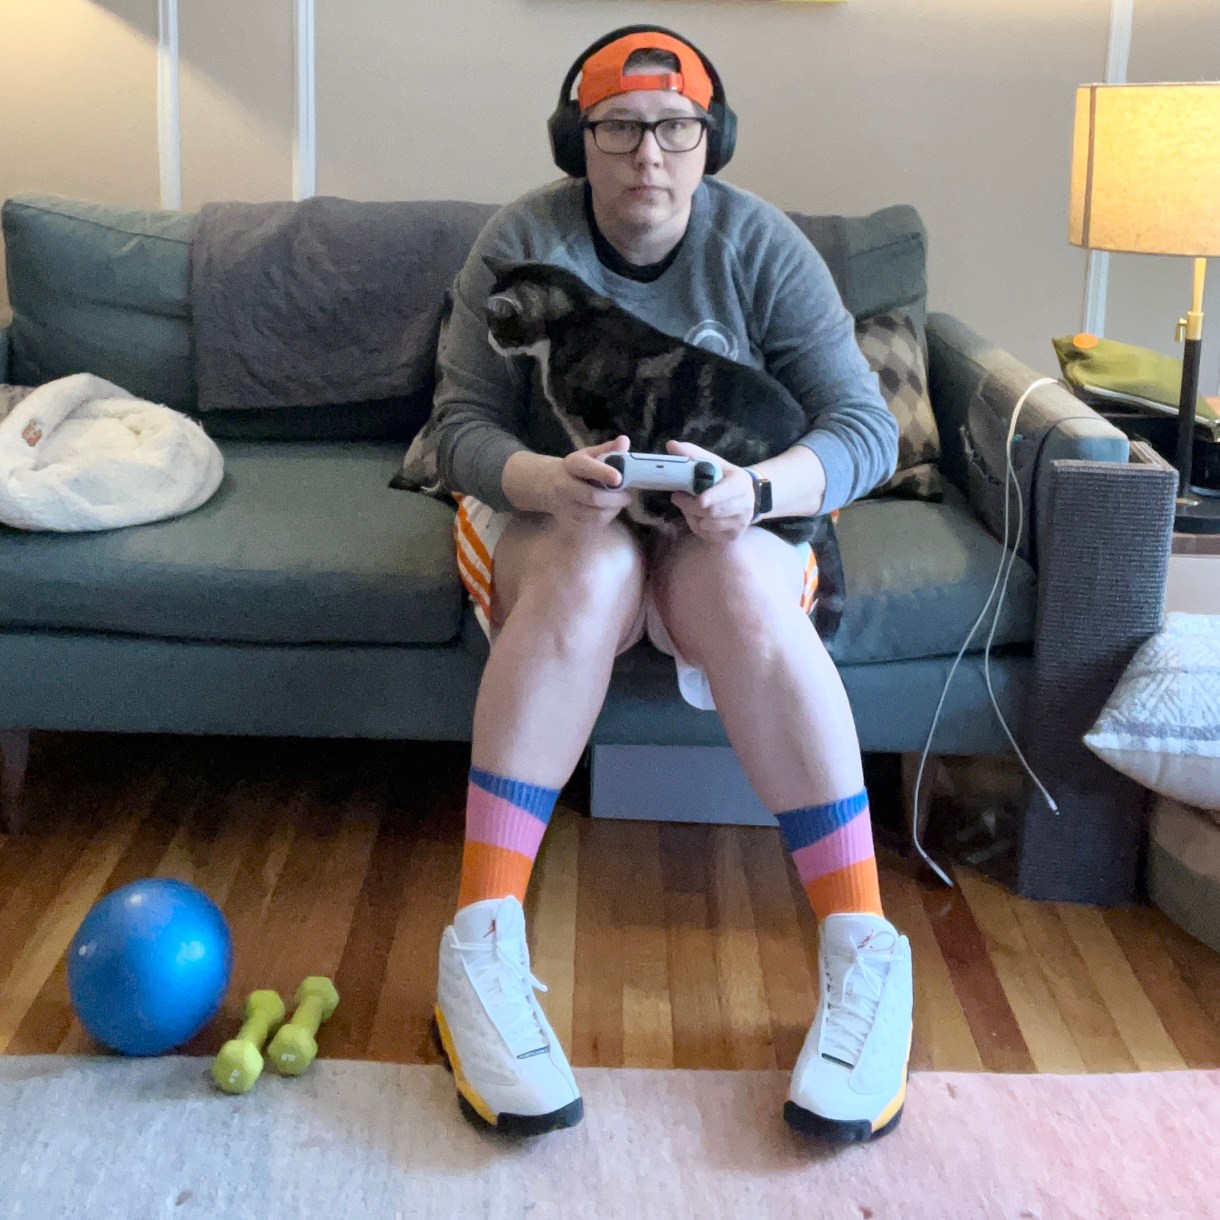 Heather is sitting her on her courch with one of her cats in her lap while playing video games. Heather is a white woman wearing a backwards orange baseball cap, headphones, colorful socks, basketball shorts and sneakers. Her cat is nuzzling her arm.